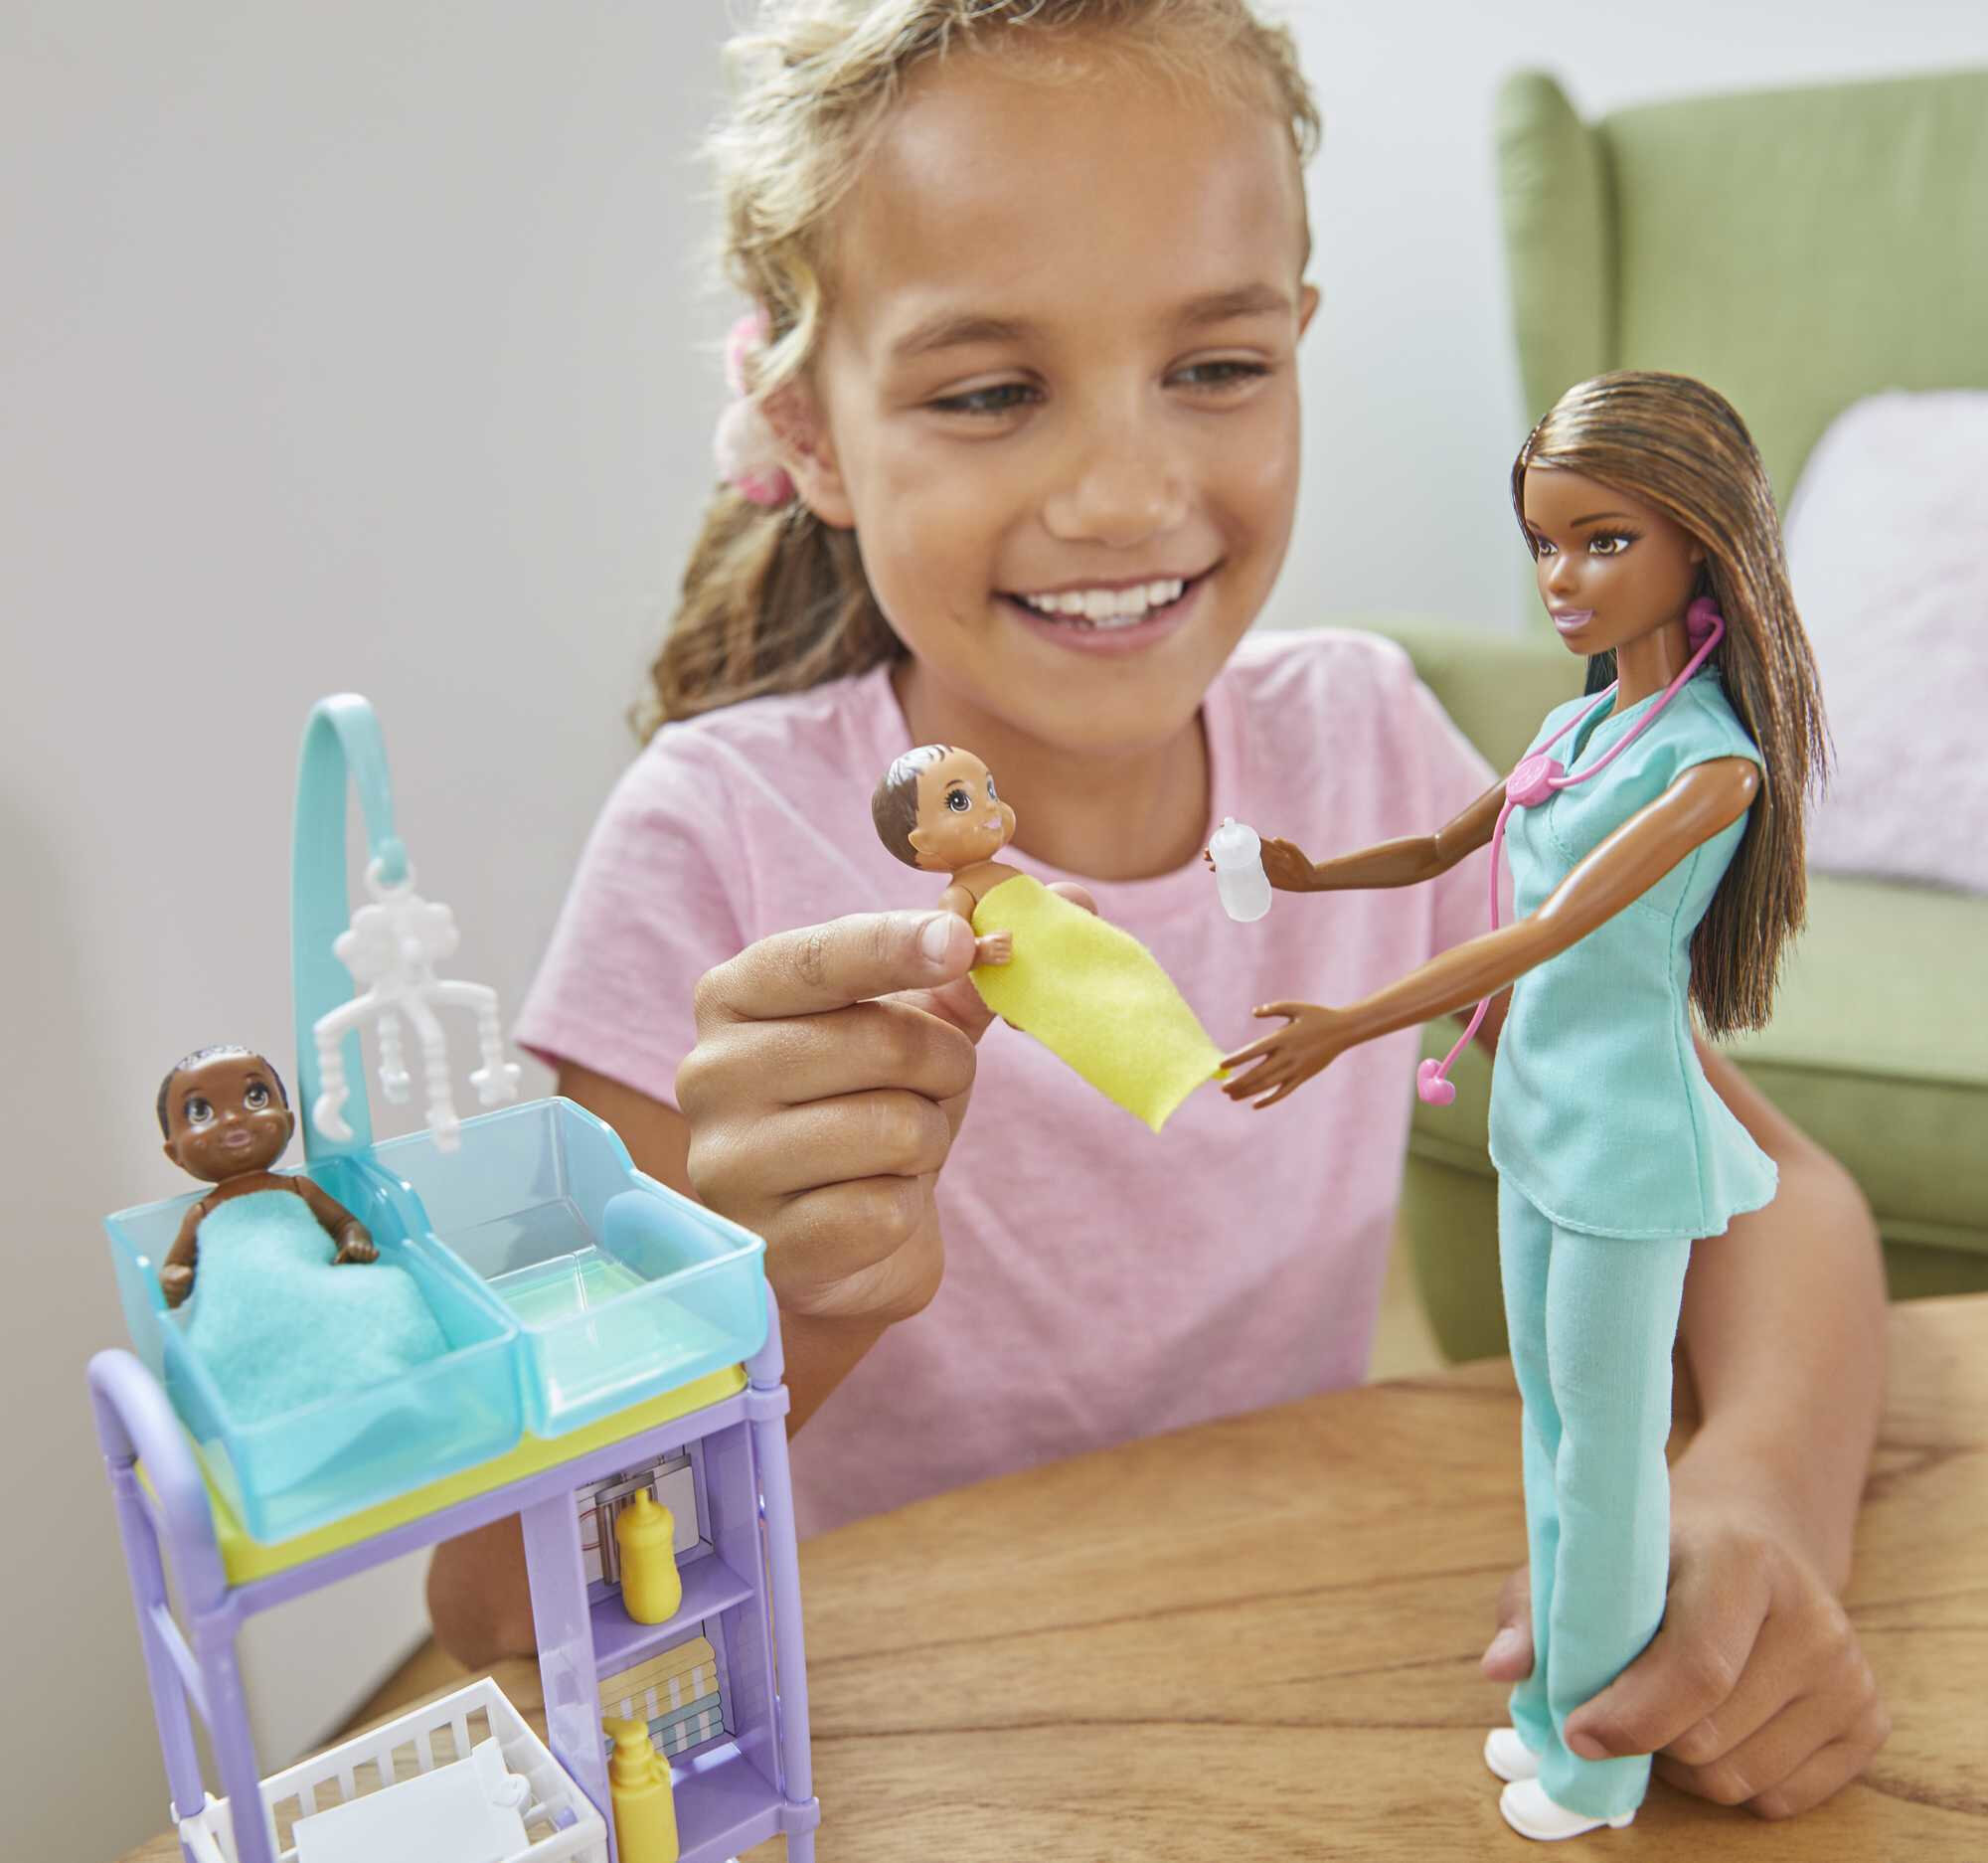 Barbie Careers Baby Doctor Playset with Brunette Fashion Doll, 2 Baby Dolls, Furniture & Accessories - image 2 of 6